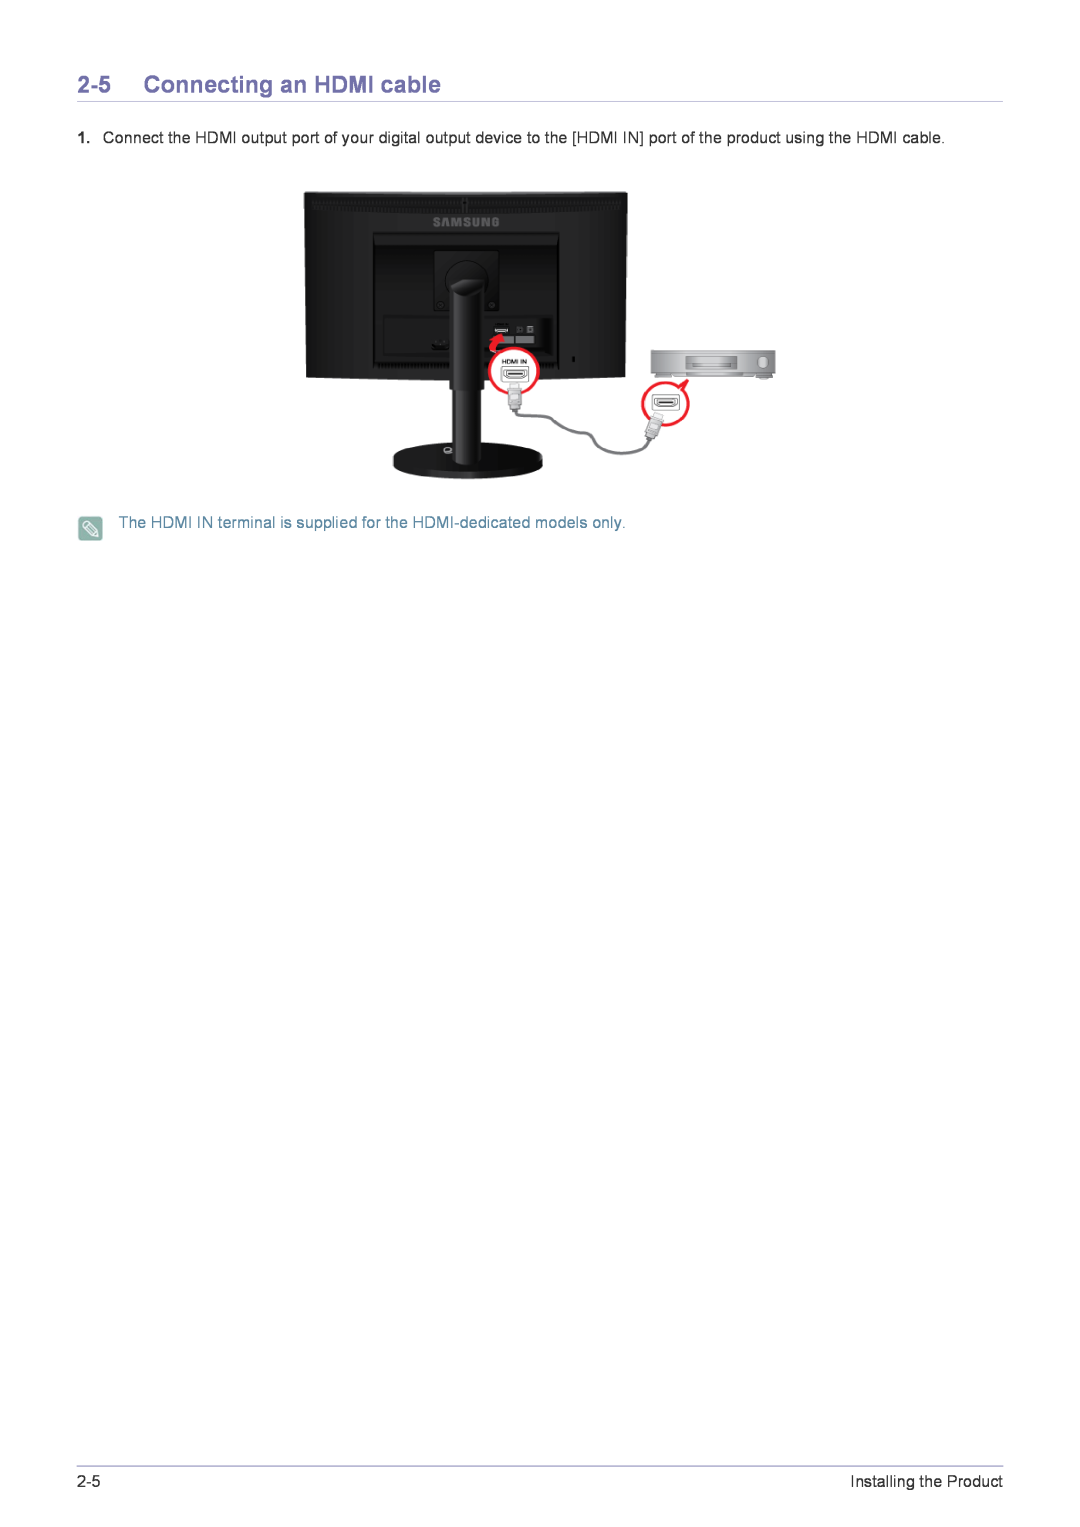 Samsung B2240MWX user manual Connecting an HDMI cable, The HDMI IN terminal is supplied for the HDMI-dedicated models only 